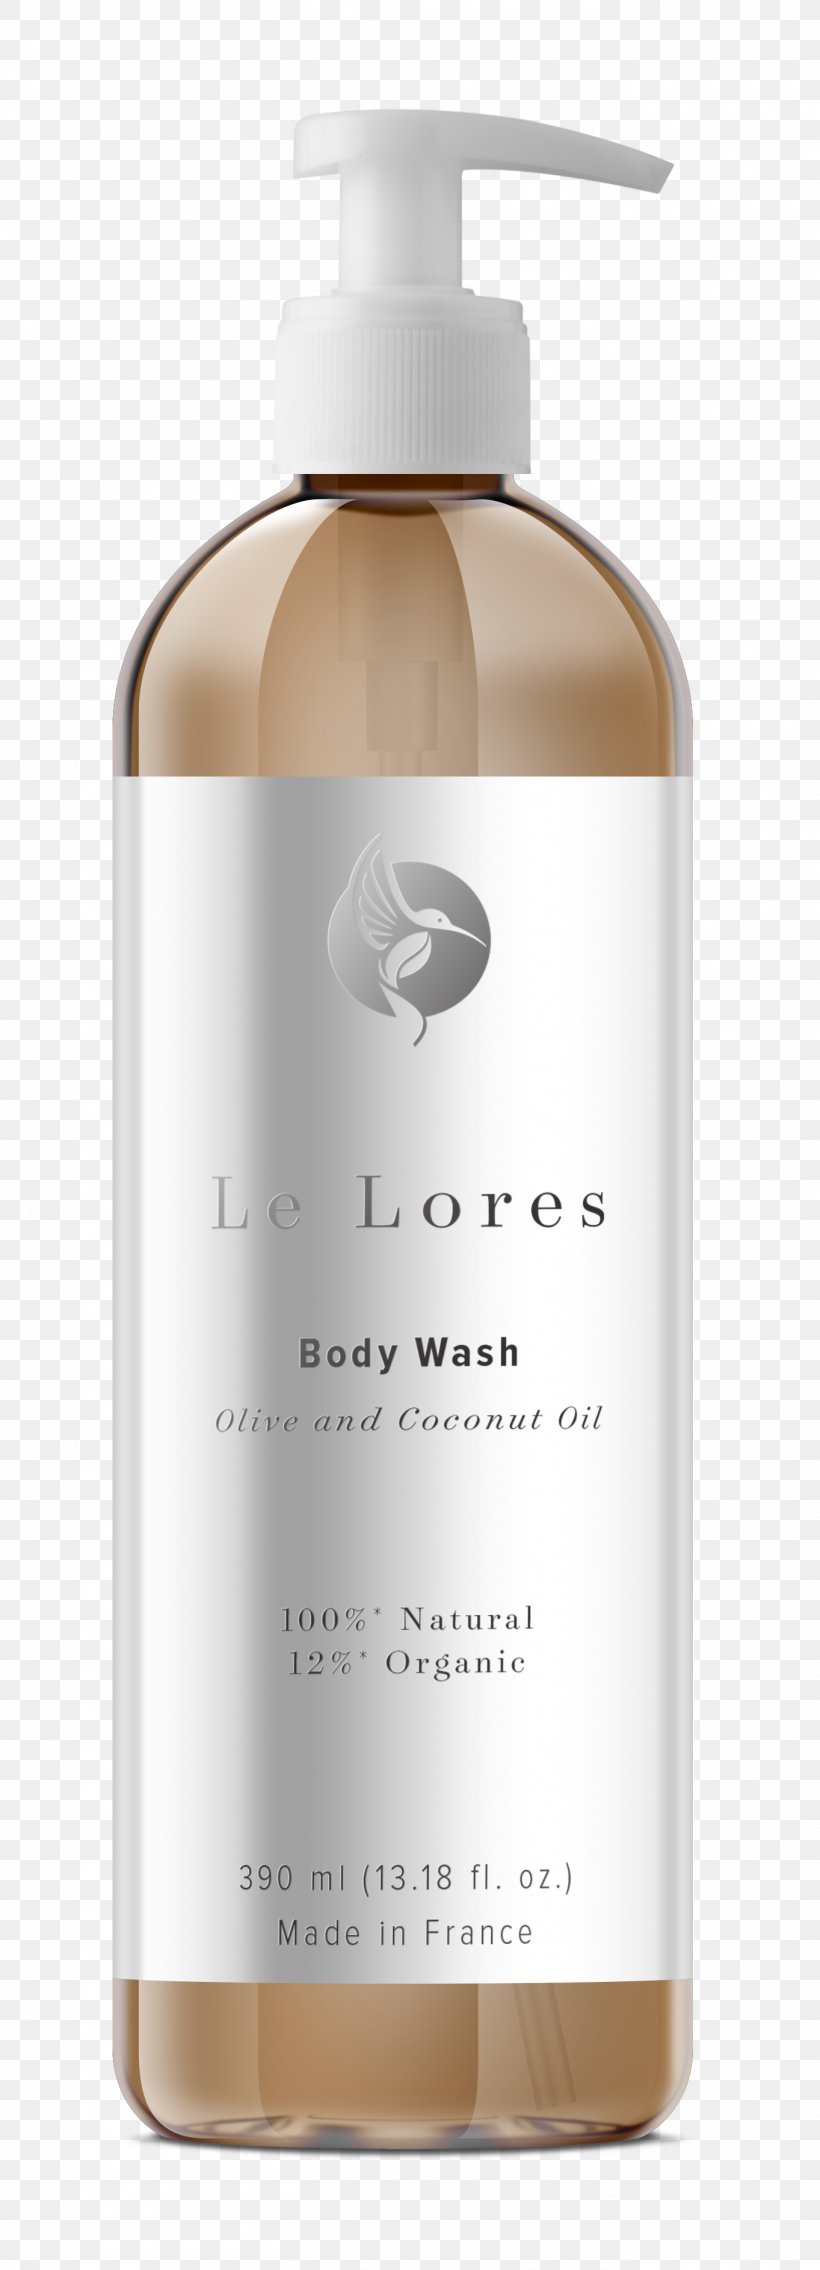 Lotion Hand Washing Le Lores, PNG, 1363x3774px, Lotion, Cosmetics, Hand, Hand Washing, Ingredient Download Free